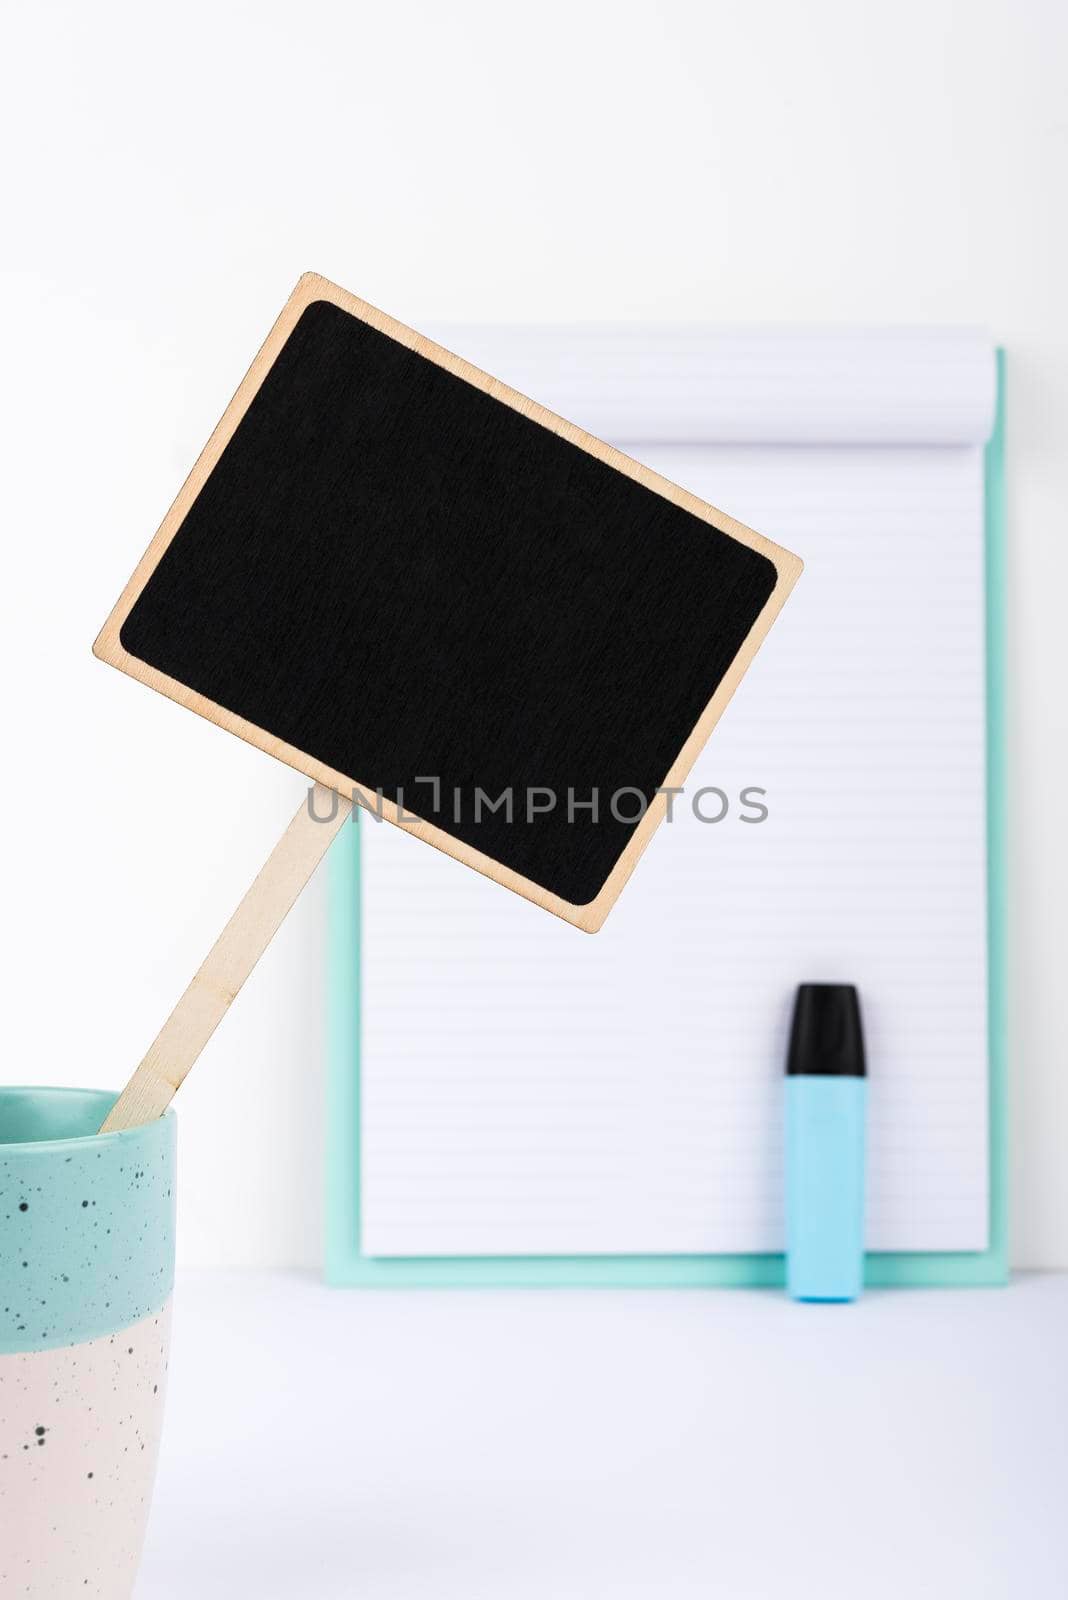 Small Blackboard With Important Message In Cup On Desk With Clipboard And Marker. Little Board With Crutial Information On Table With Paper. Current Ideas Presented. by nialowwa